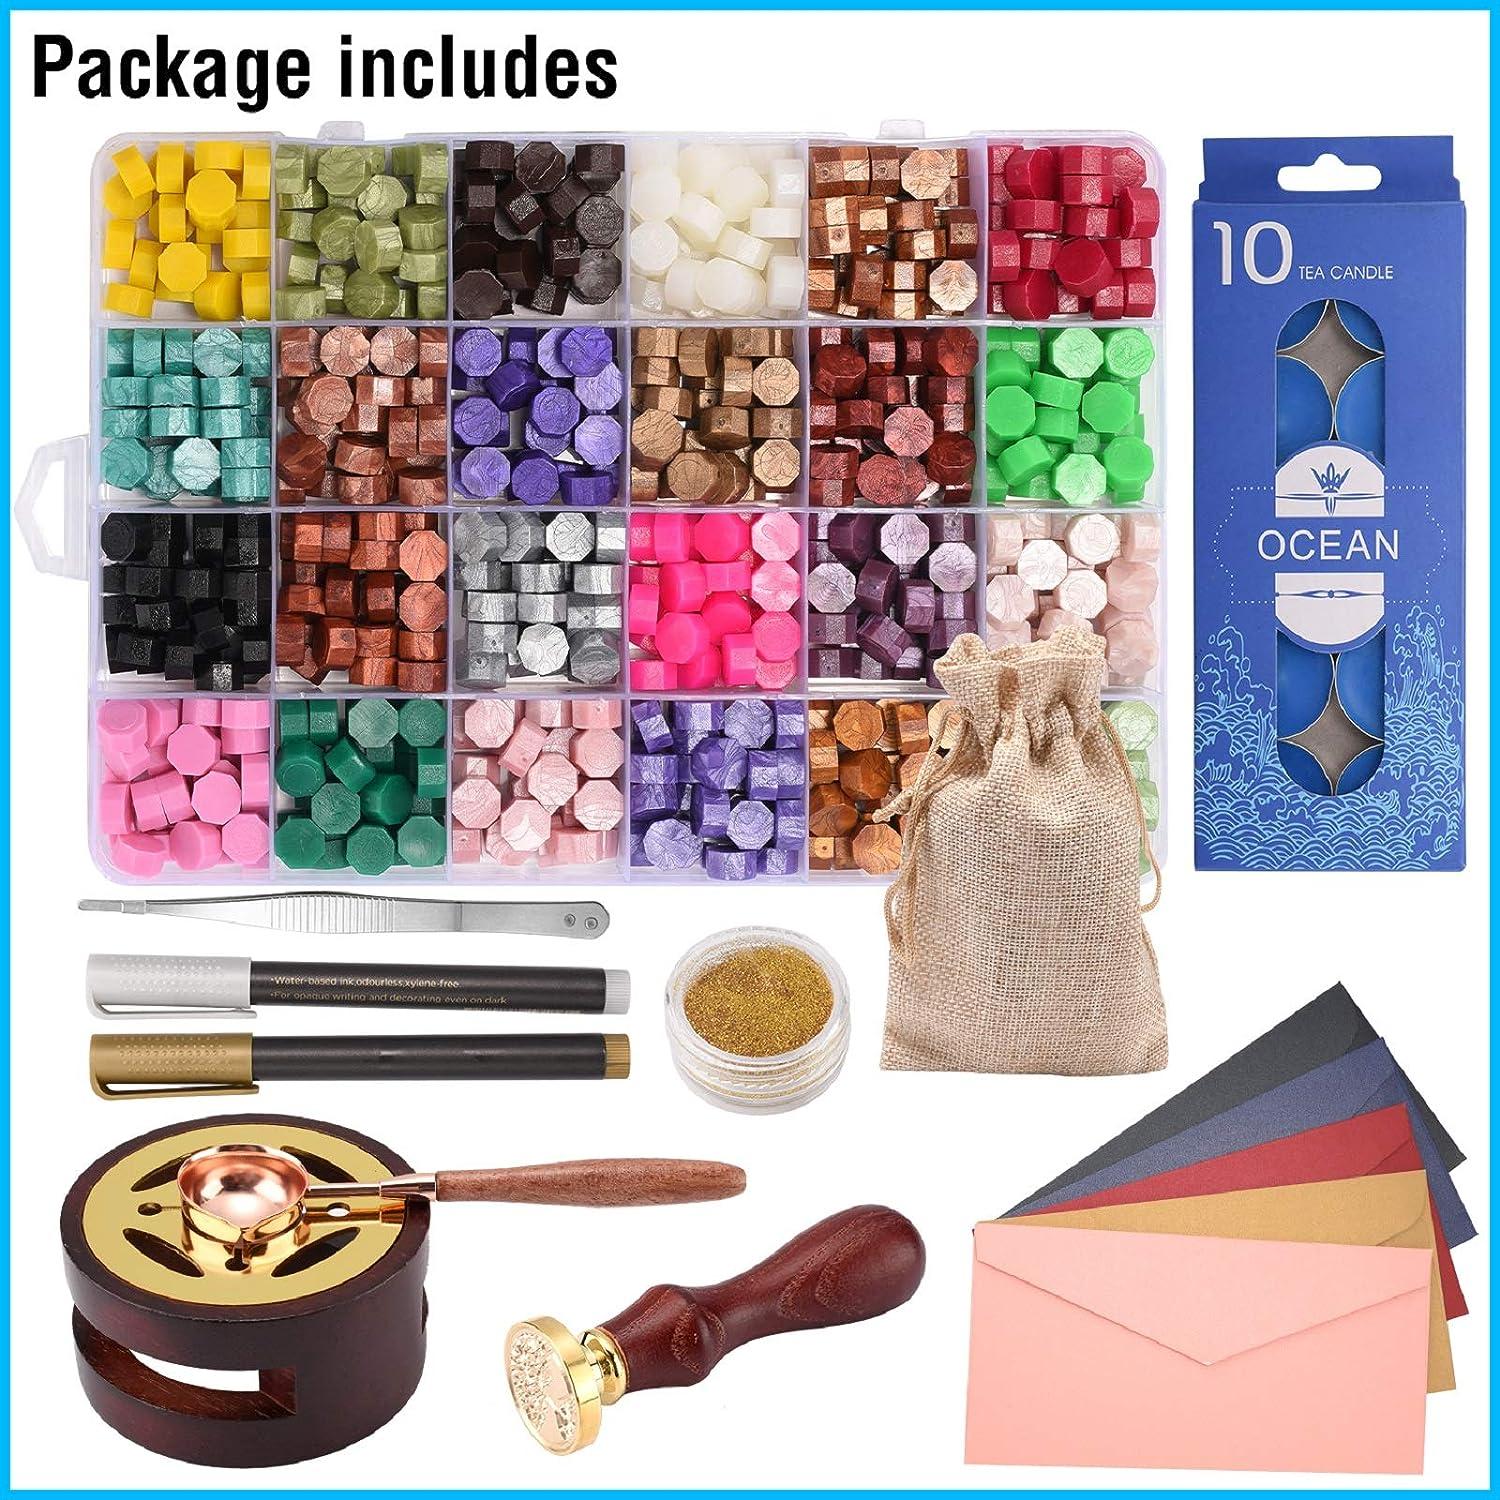 RLRY Wax Seal Stamp Kit with Gift Box, Wax Seal Beads with Wax Seal Stamp,  Sealing Wax Warmer, Wax Seal Metallic Pen, Wax Seal Kit for Gift and